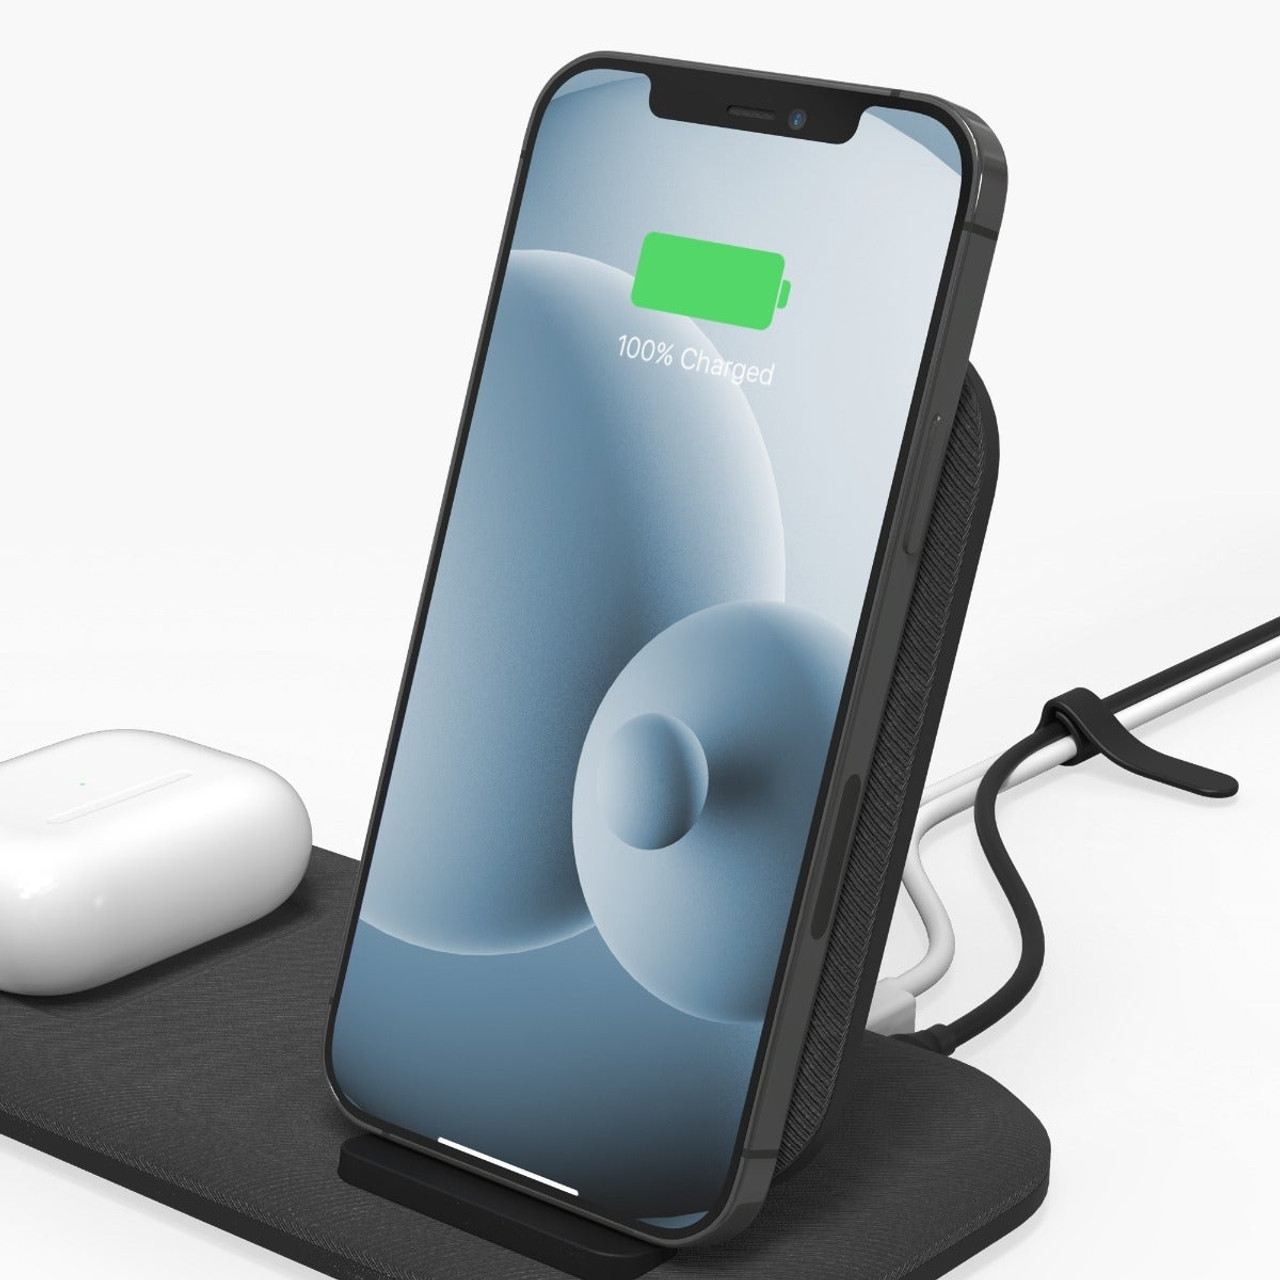 mophie snap+ charging stand & pad